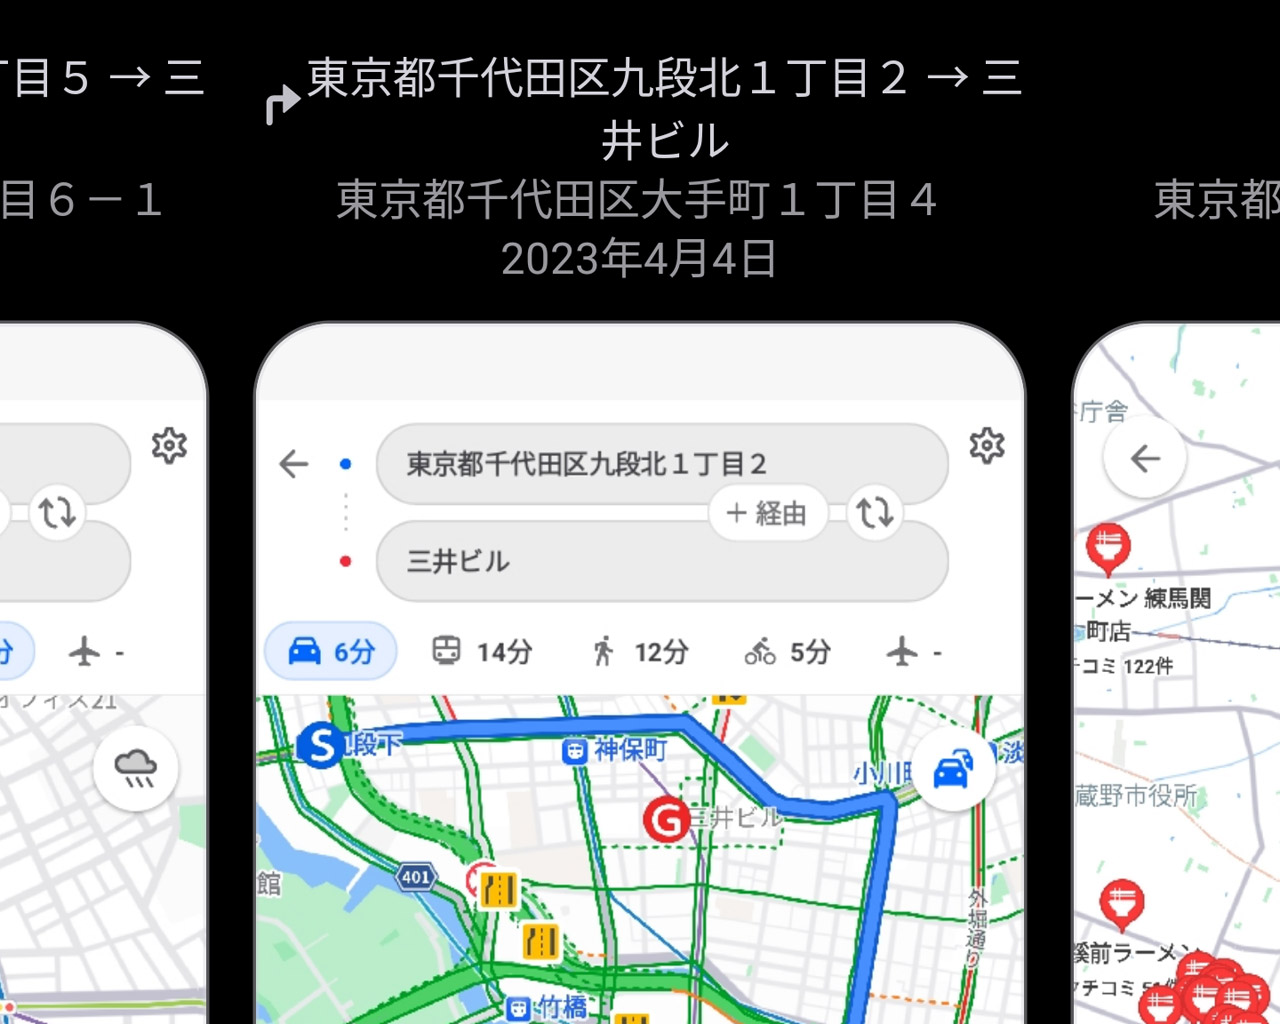 The Maps app also has a tab function, “Yahoo! MAP” which turns out to be very convenient – Keitai Watch